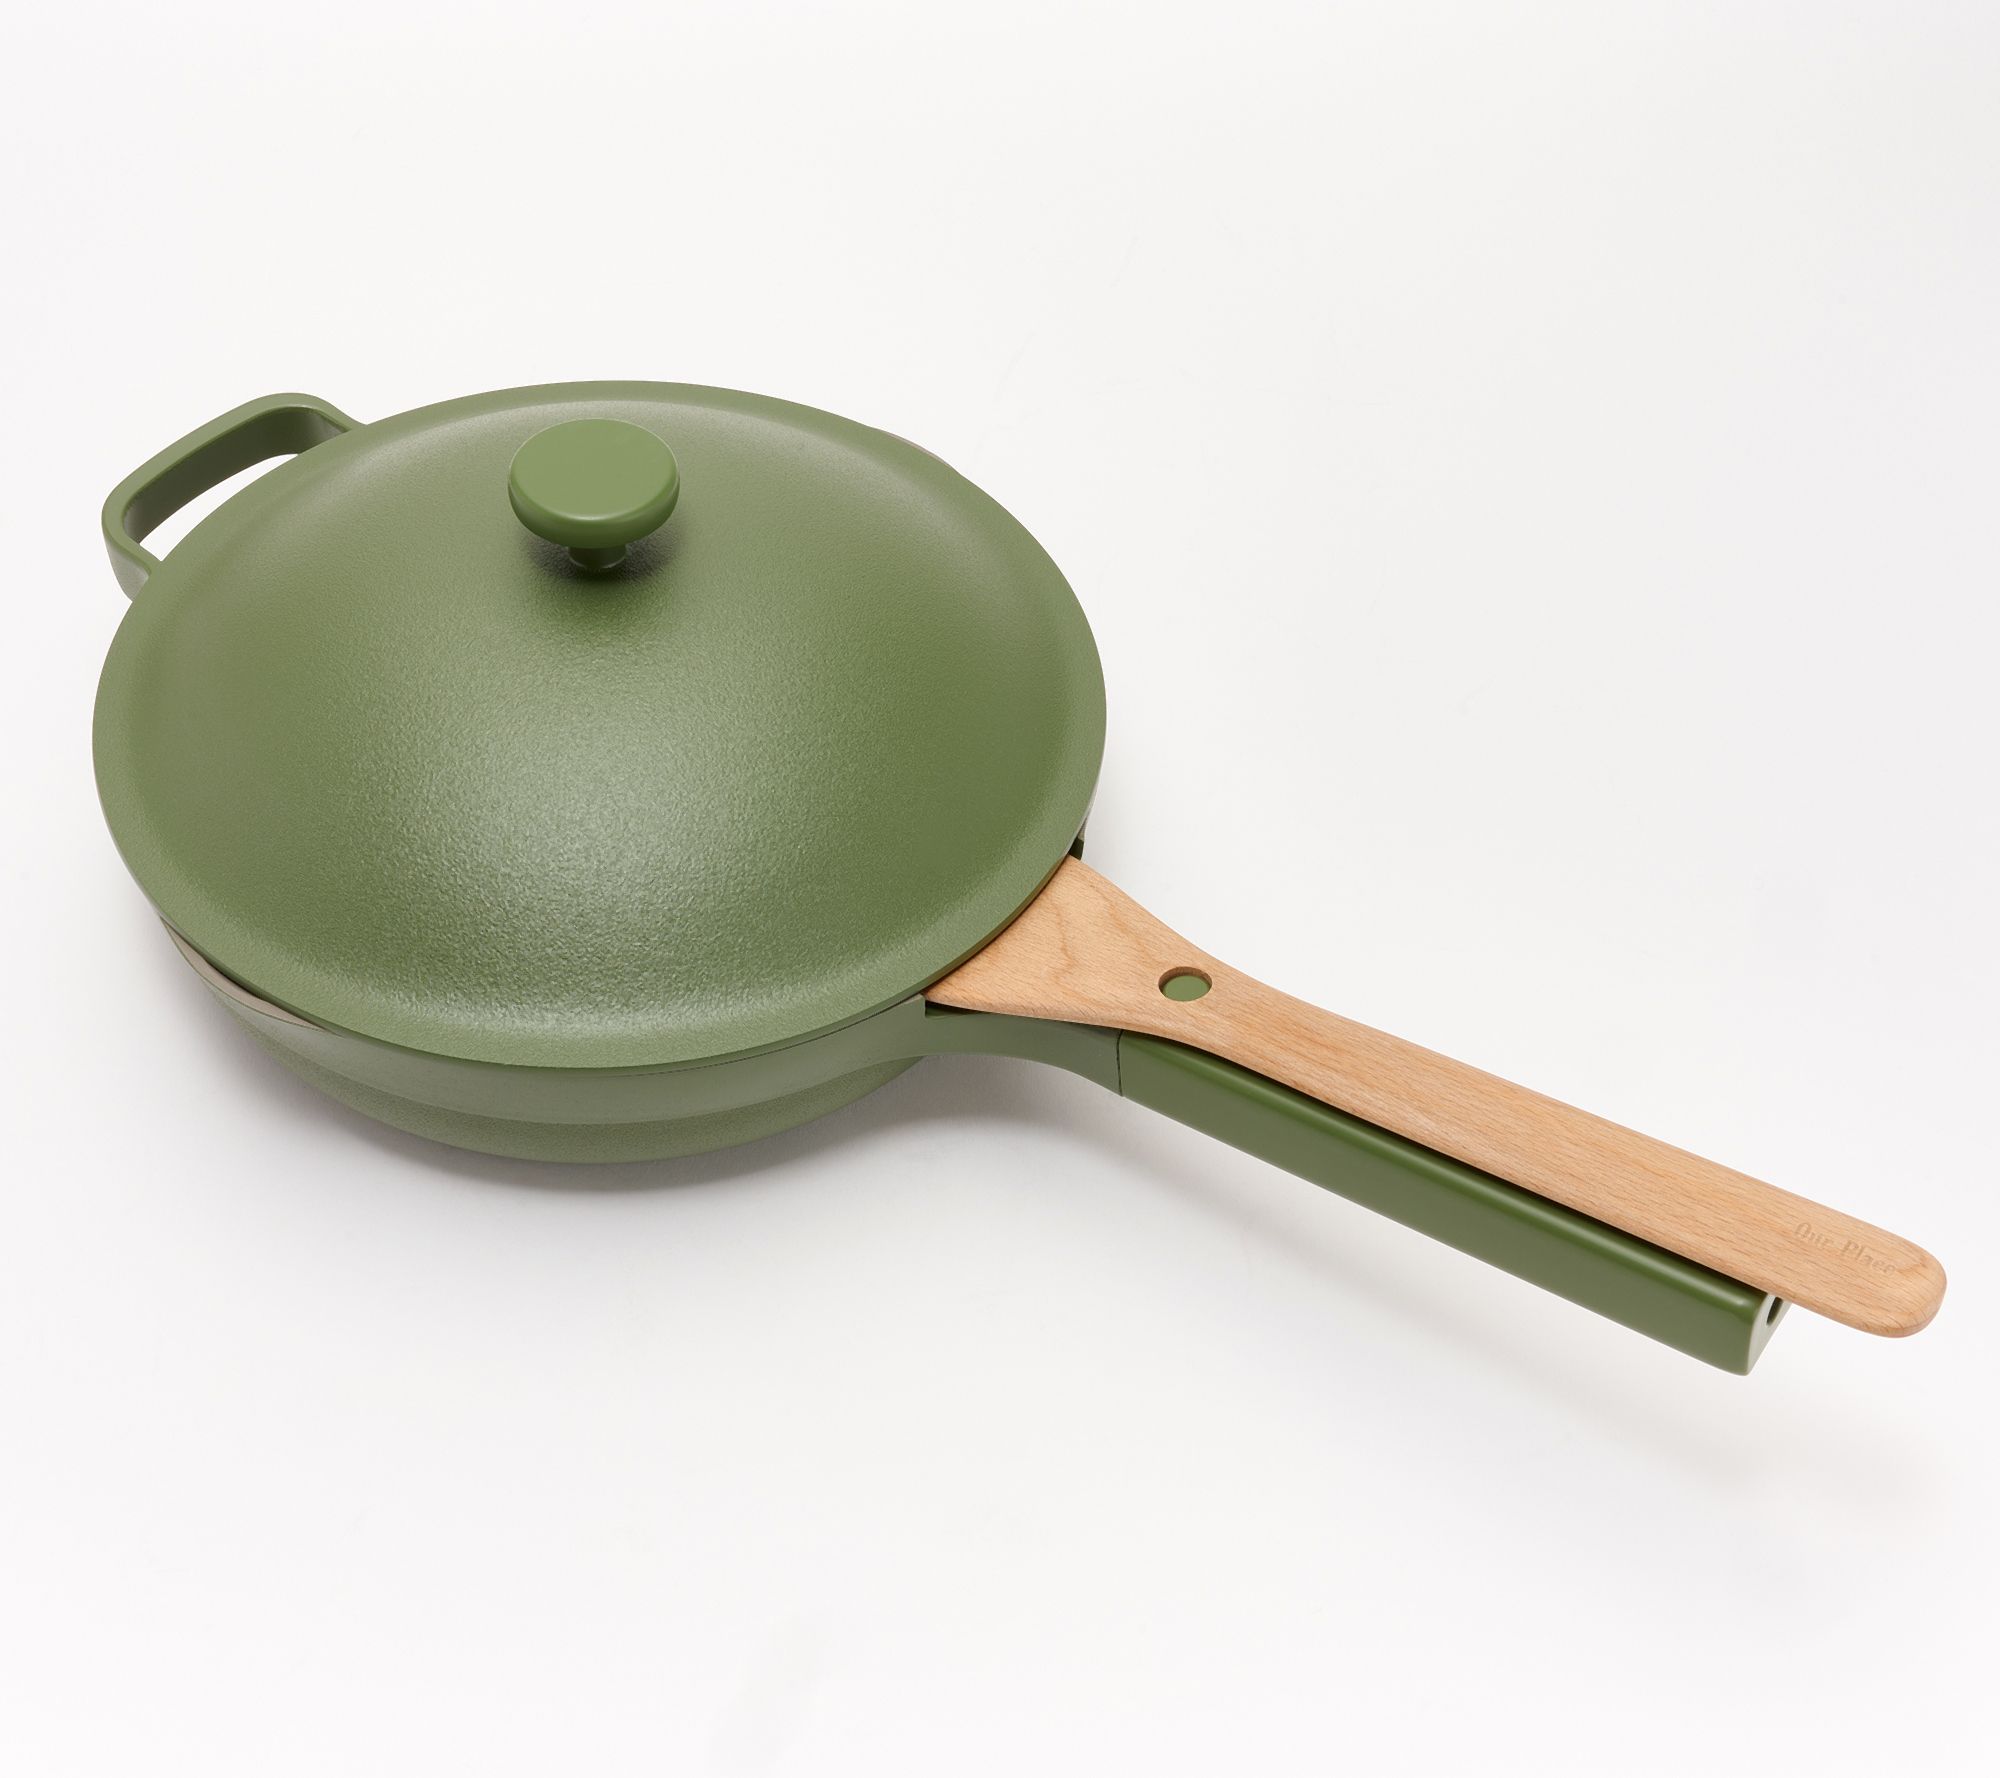 Our Place Set of 2 10-in-1 Ceramic Nonstick Always Pans 2.0